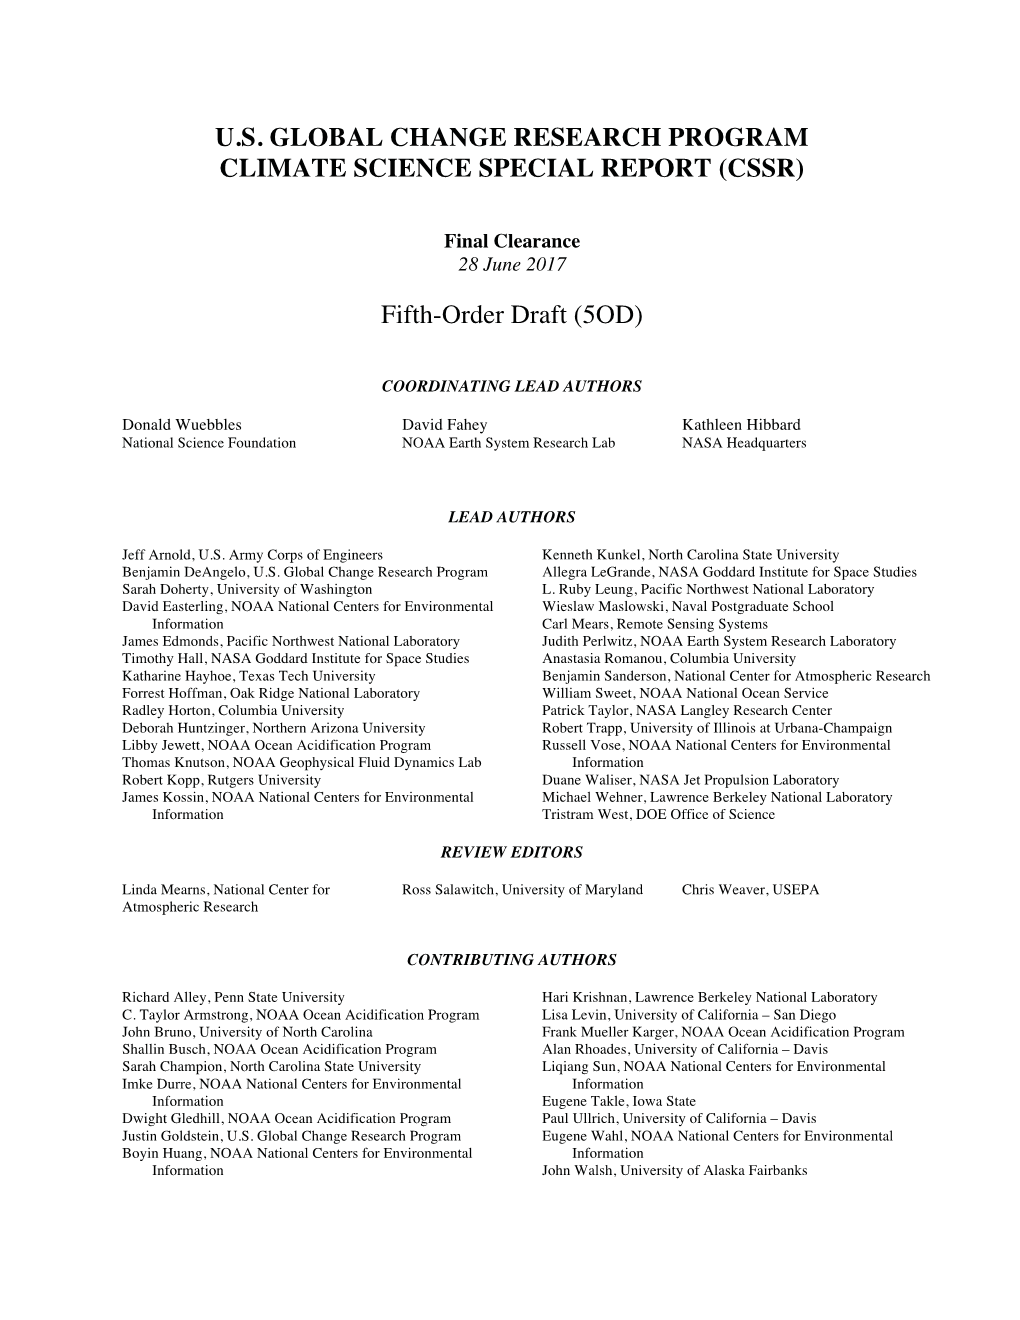 U.S. Global Change Research Program Climate Science Special Report (Cssr)